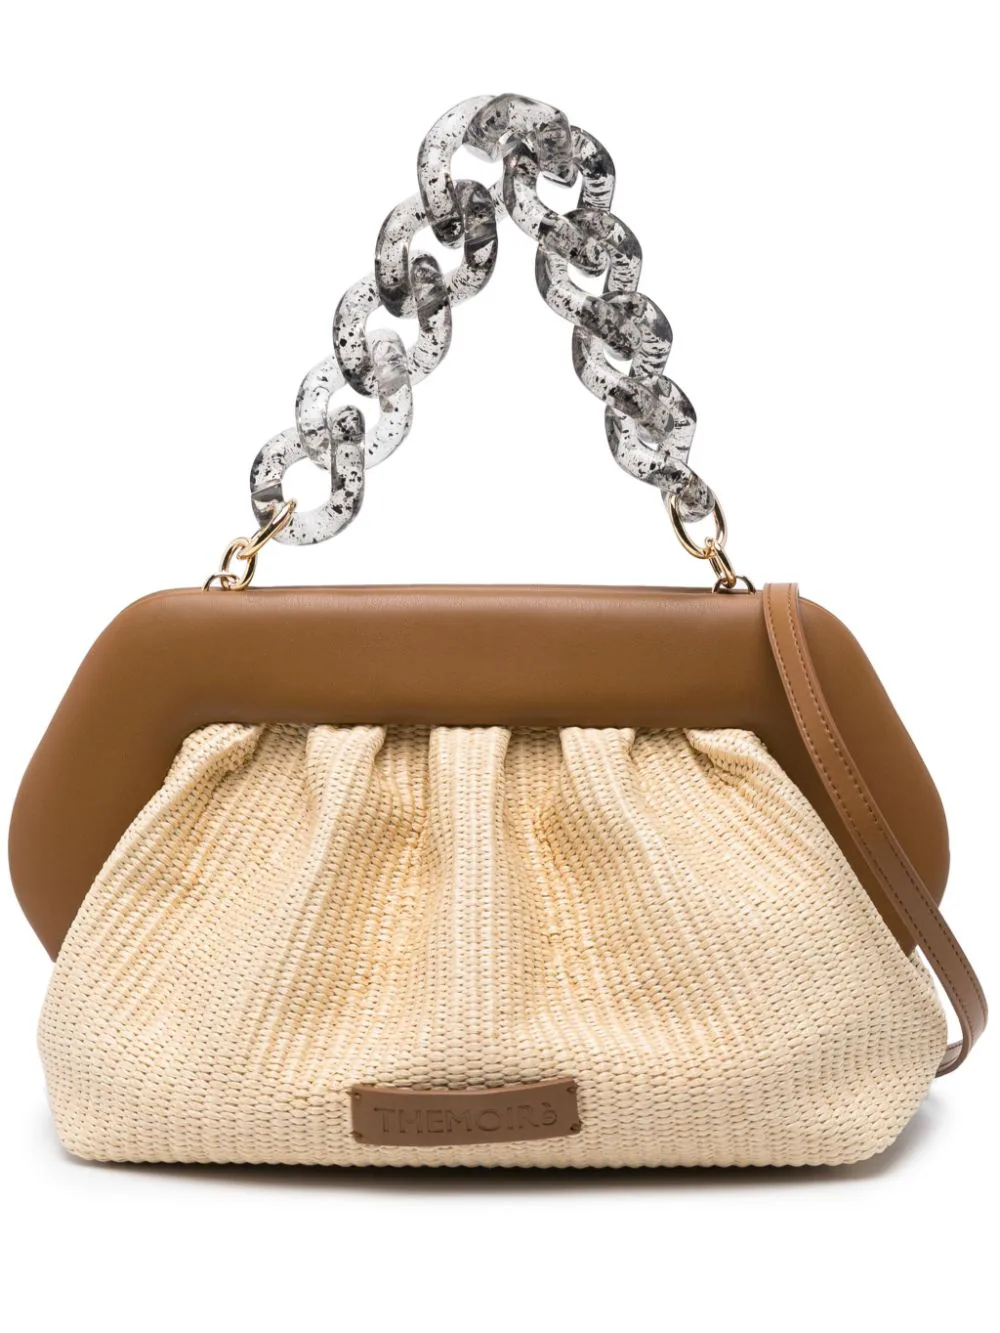 Themoire' Bios Straw Clutch Bag In Brown